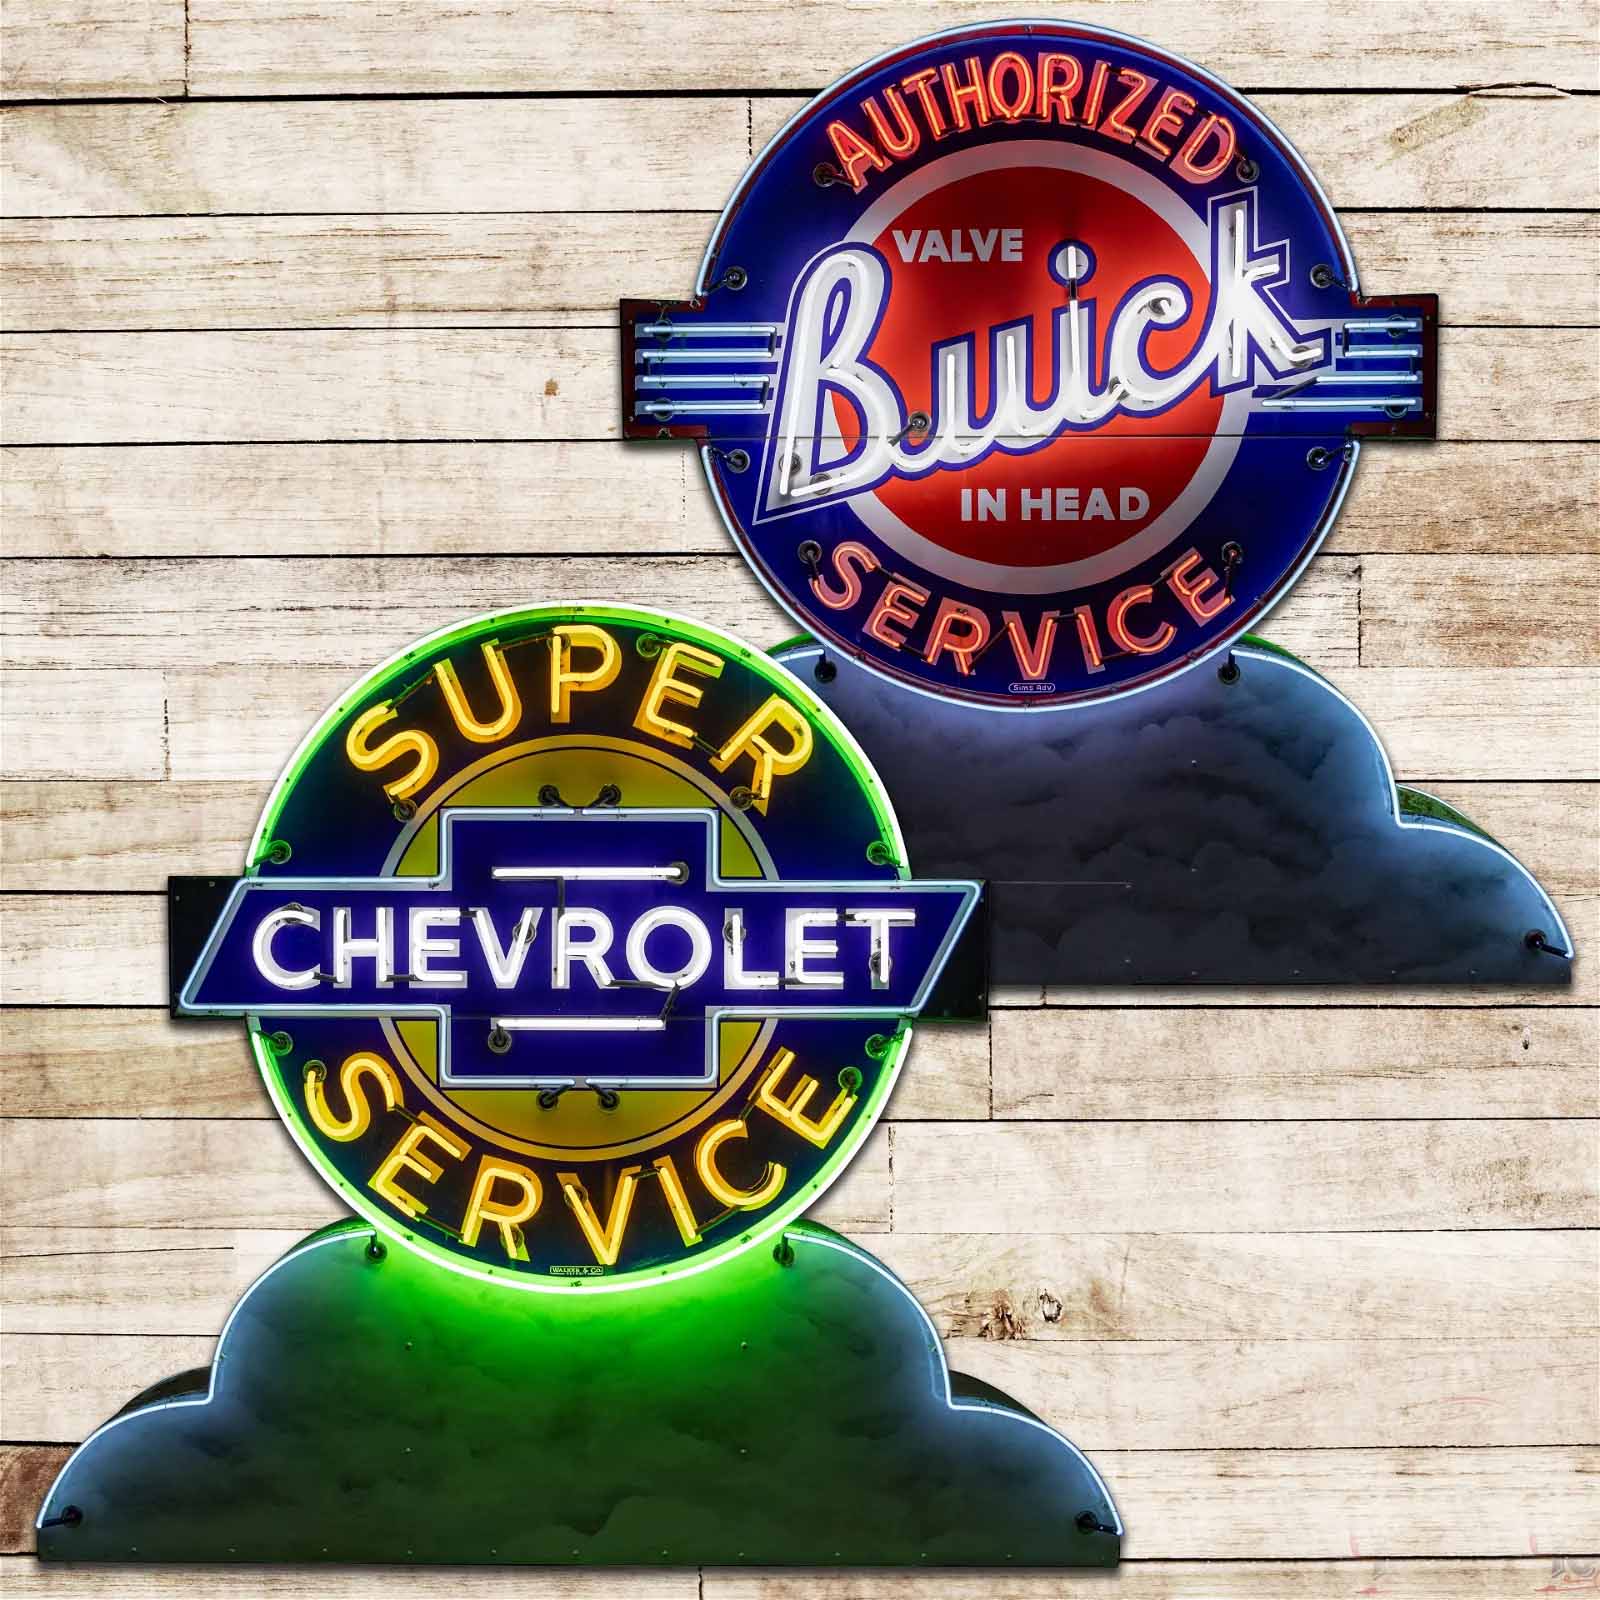 Chevrolet 'Super Service' and Buick 'Valve In Head' double-sided porcelain neon sign, which sold for $145,000 ($168,000 with buyer’s premium) at Richmond.